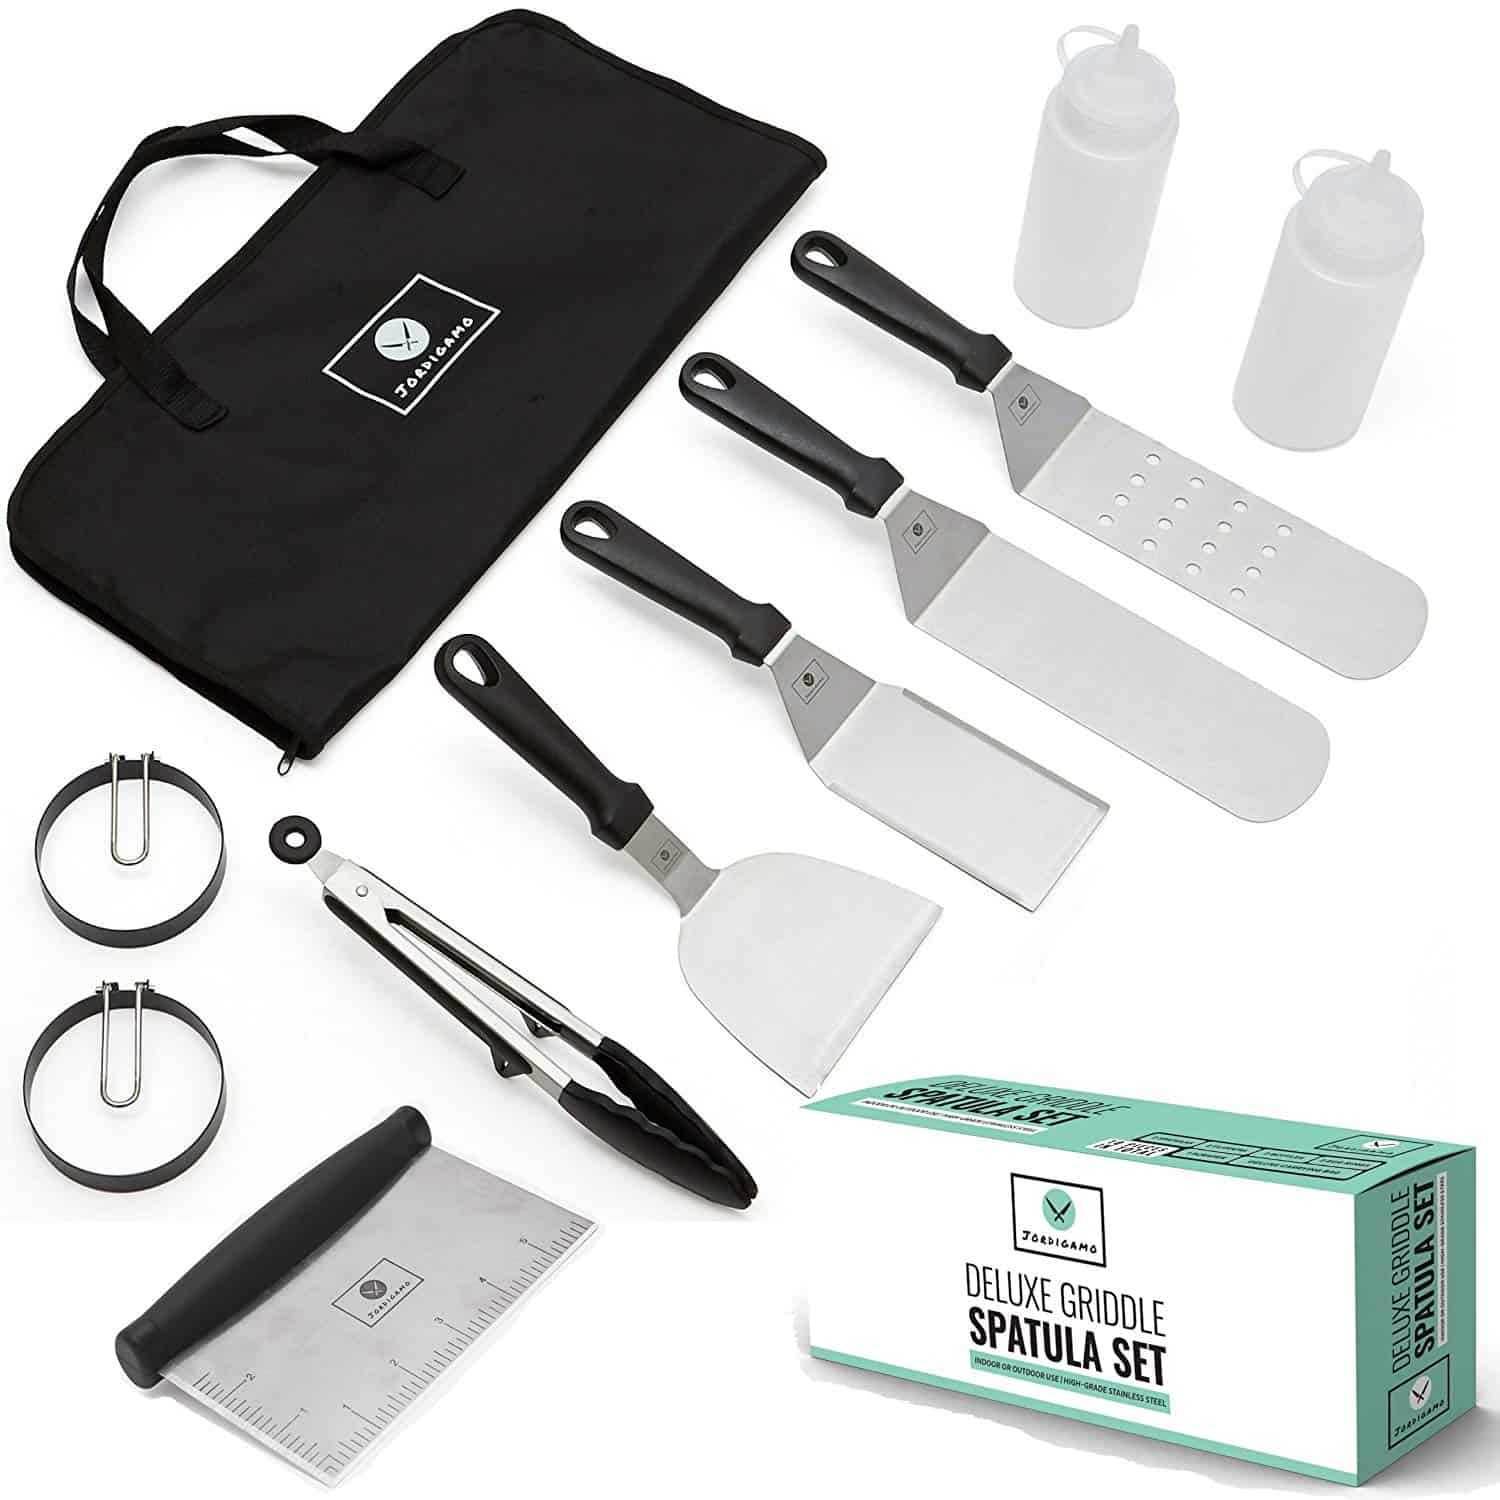 Kenley 7-Piece Griddle Spatula Tool Set Kit for Flat Top Grill Outdoor BBQ 